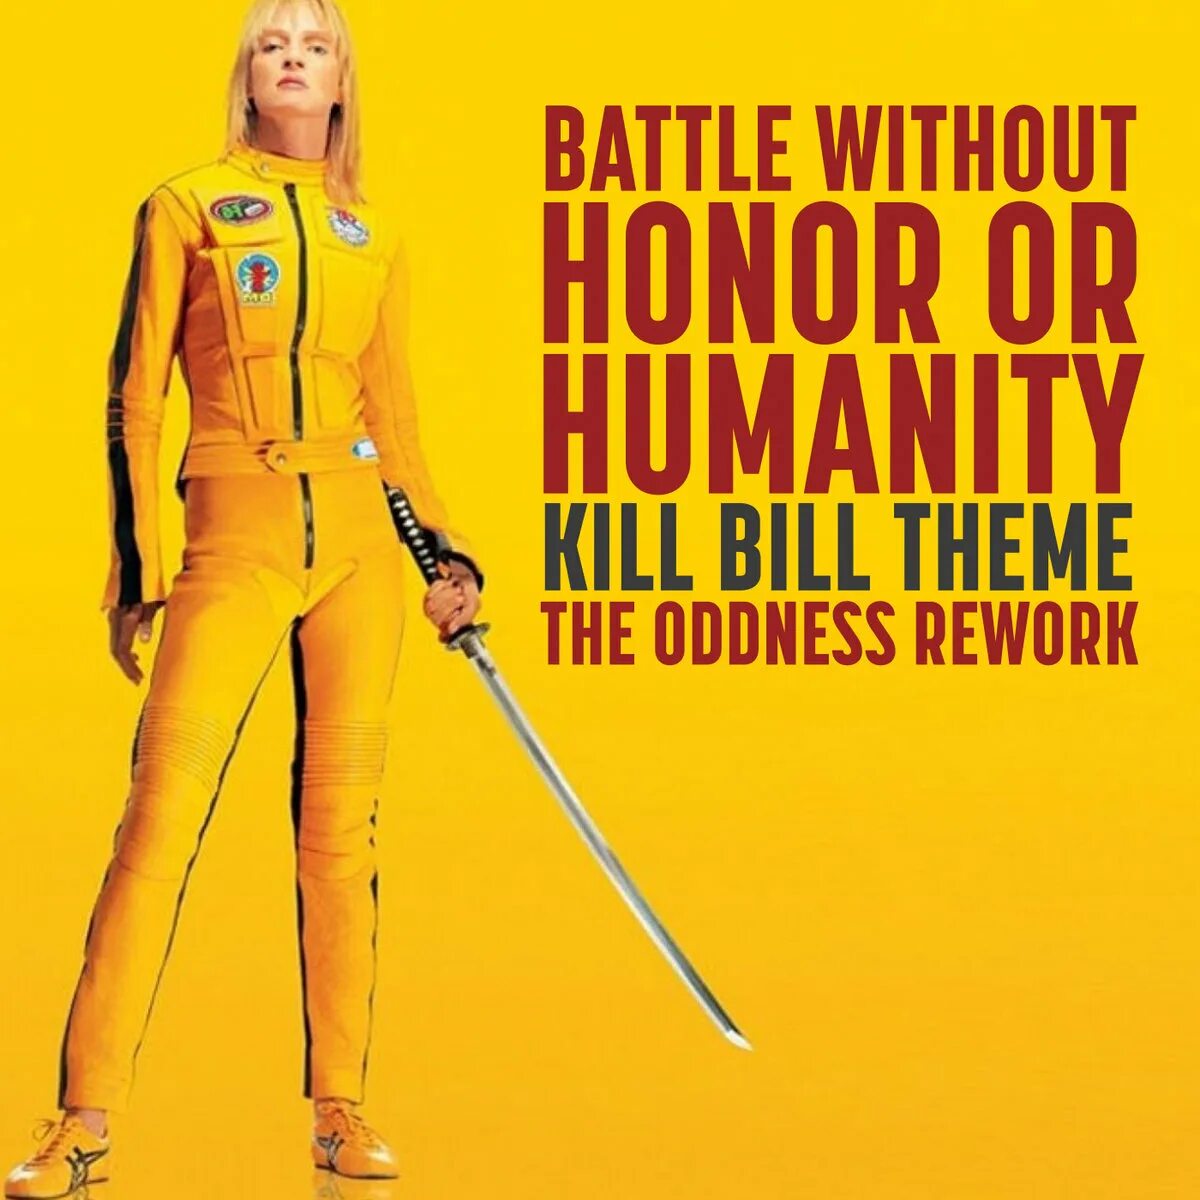 Without honor or humanity. Battle without Honor or Humanity. Tomoyasu Hotei Battle without Honor or Humanity. Kill Bill Battle without Honor or Humanity. Kill Bill the oddness Rework Battle without Honor or Humanity.